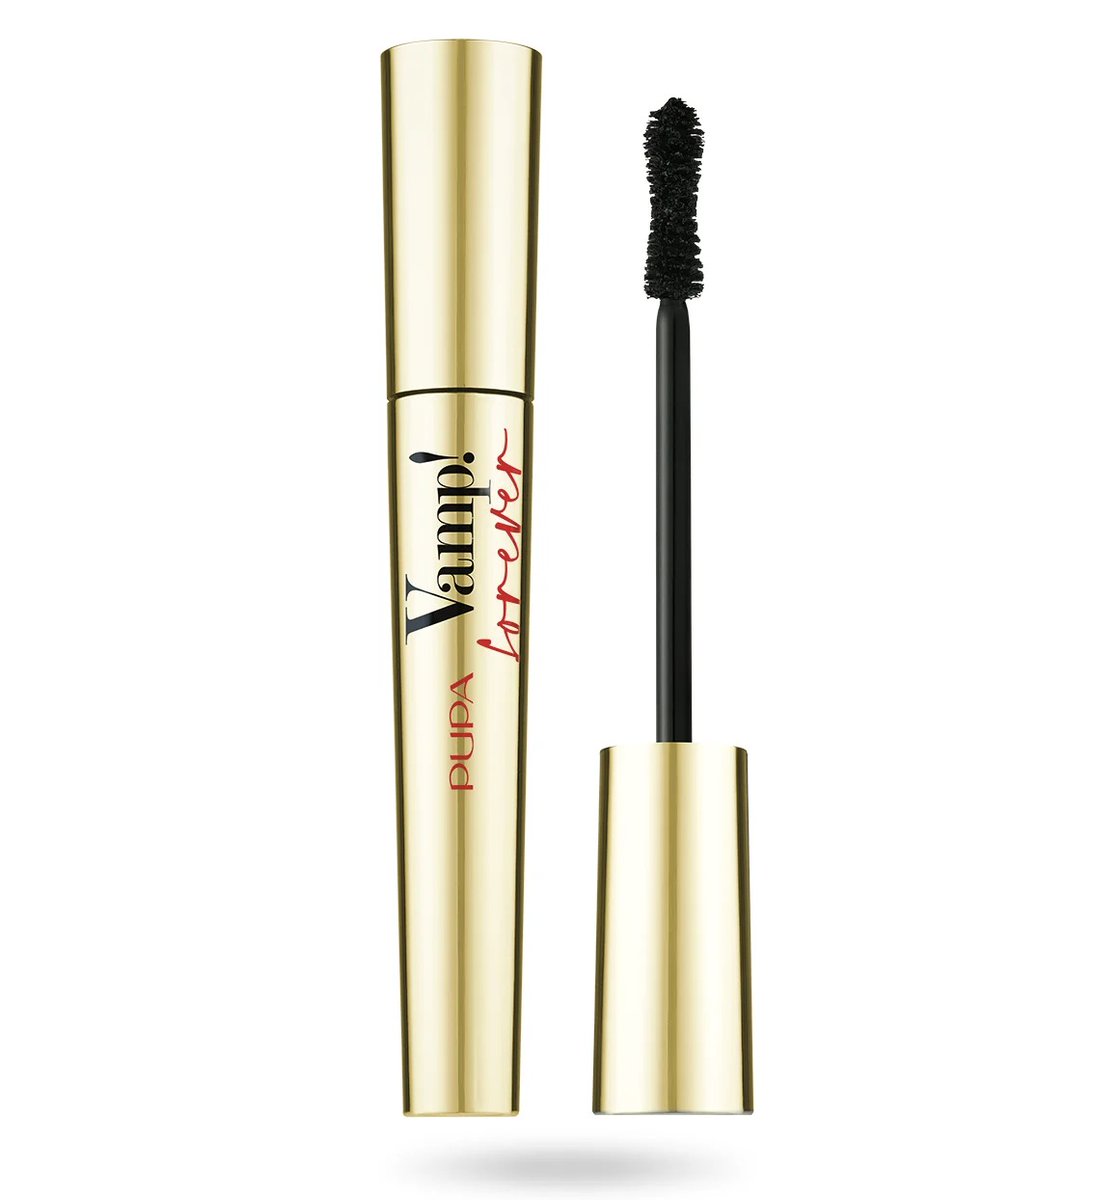 This week's Beauty Twitter Giveaway is Pupa Milano Vamp Forever Exceptional Volume Mascara. It promises volume and great hold. To enter, follow @davelackie & RT (ends 10/04) #win Good luck to all!!